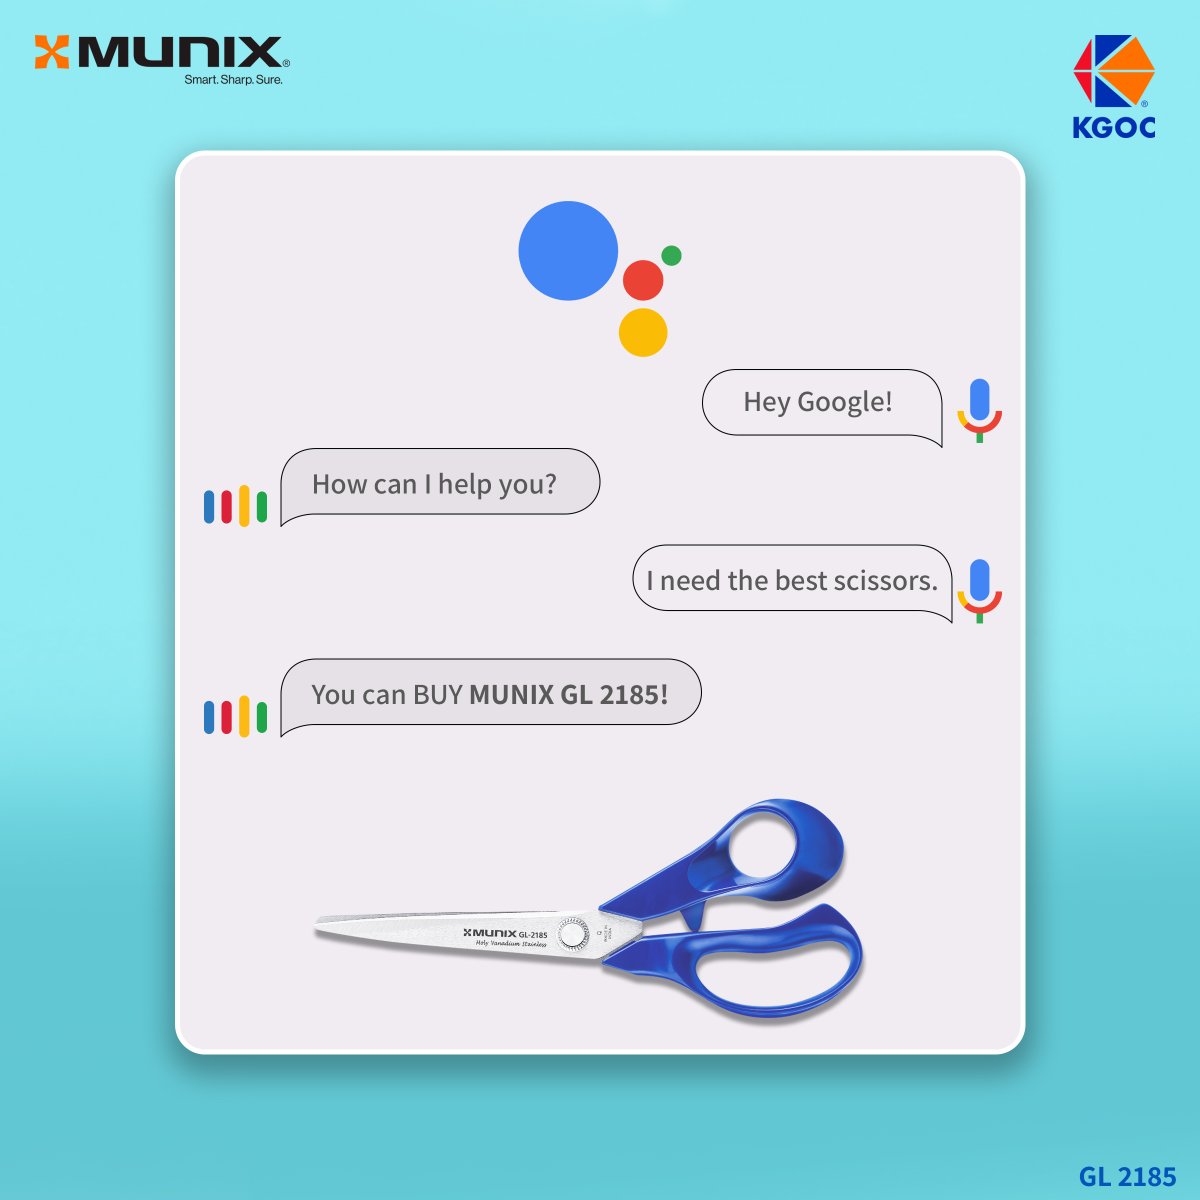 Unlock precision and quality with MUNIX GL 2185 scissors! Shop now and elevate your cutting experience! #MUNIX #Scissors #PrecisionCutting #kgoc